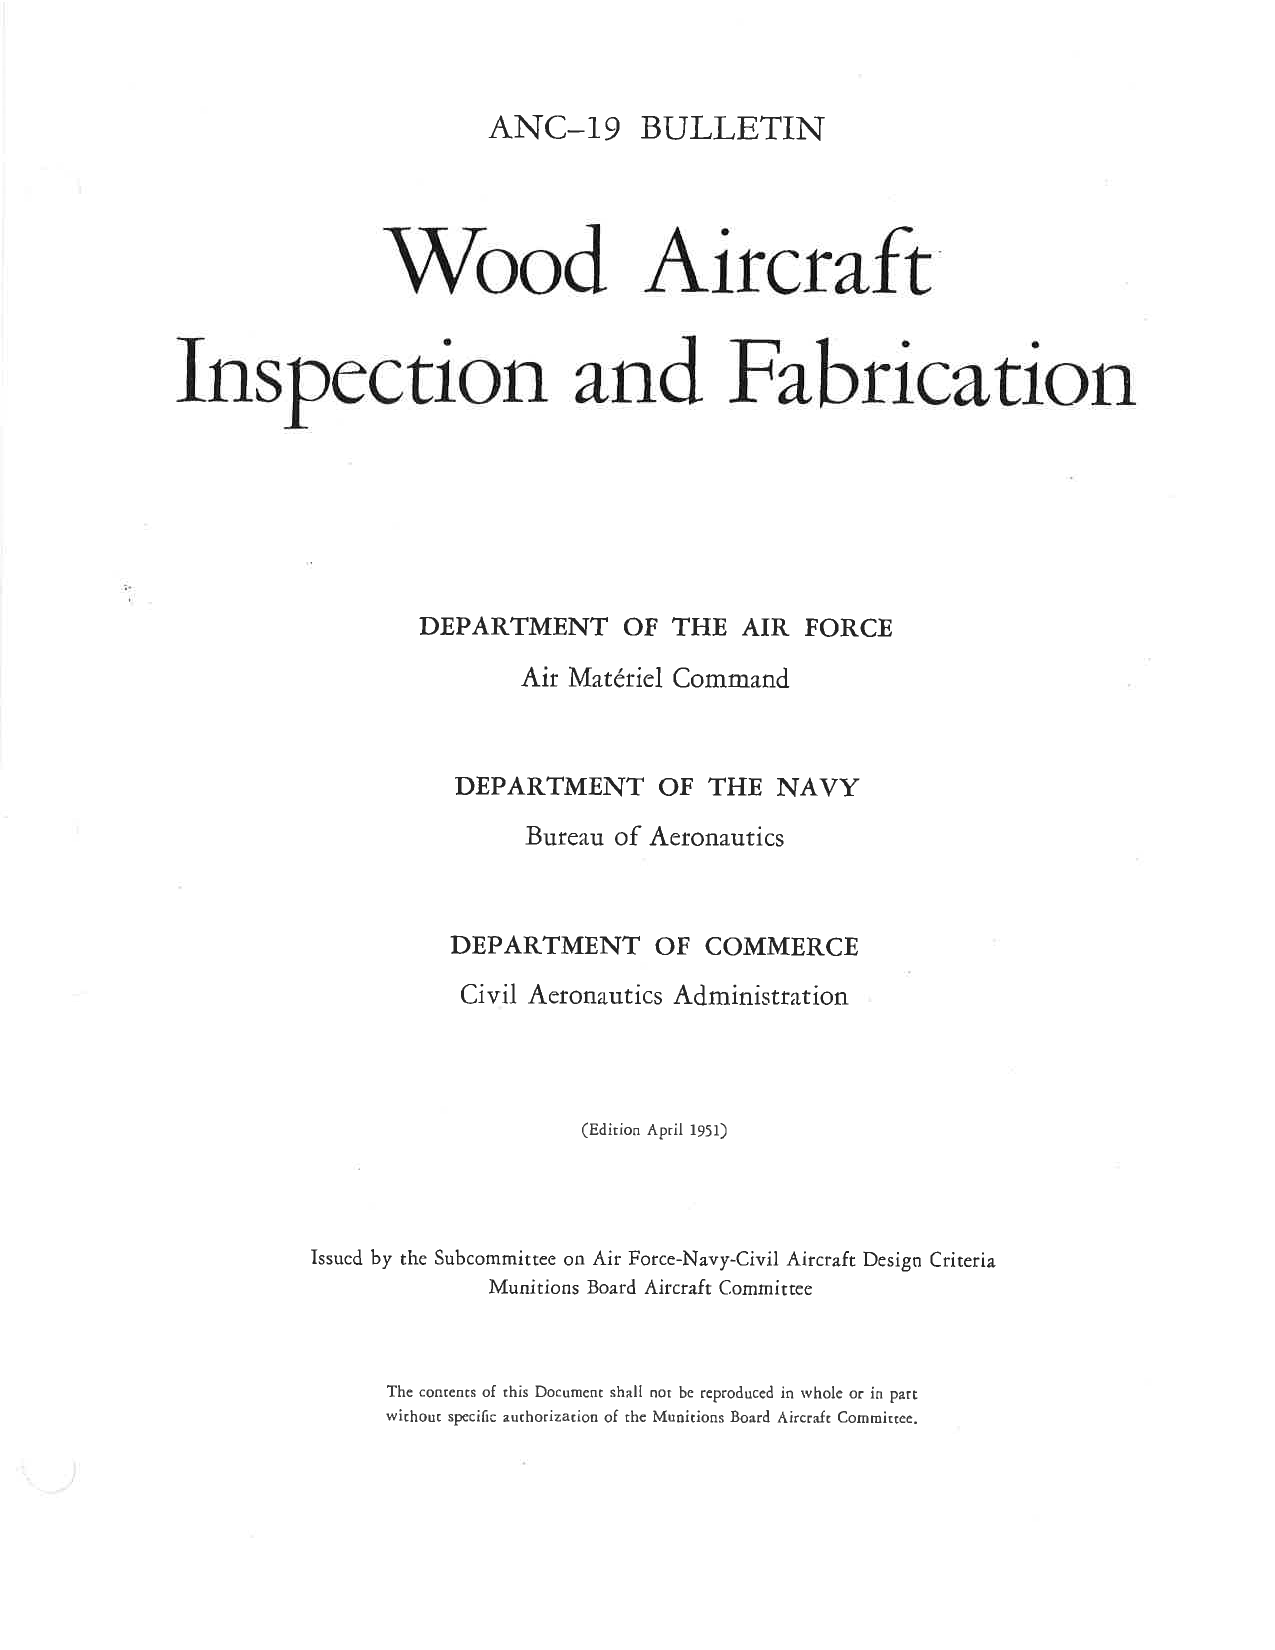 Sample page 1 from AirCorps Library document: Wood Aircraft Inspection and Fabrication